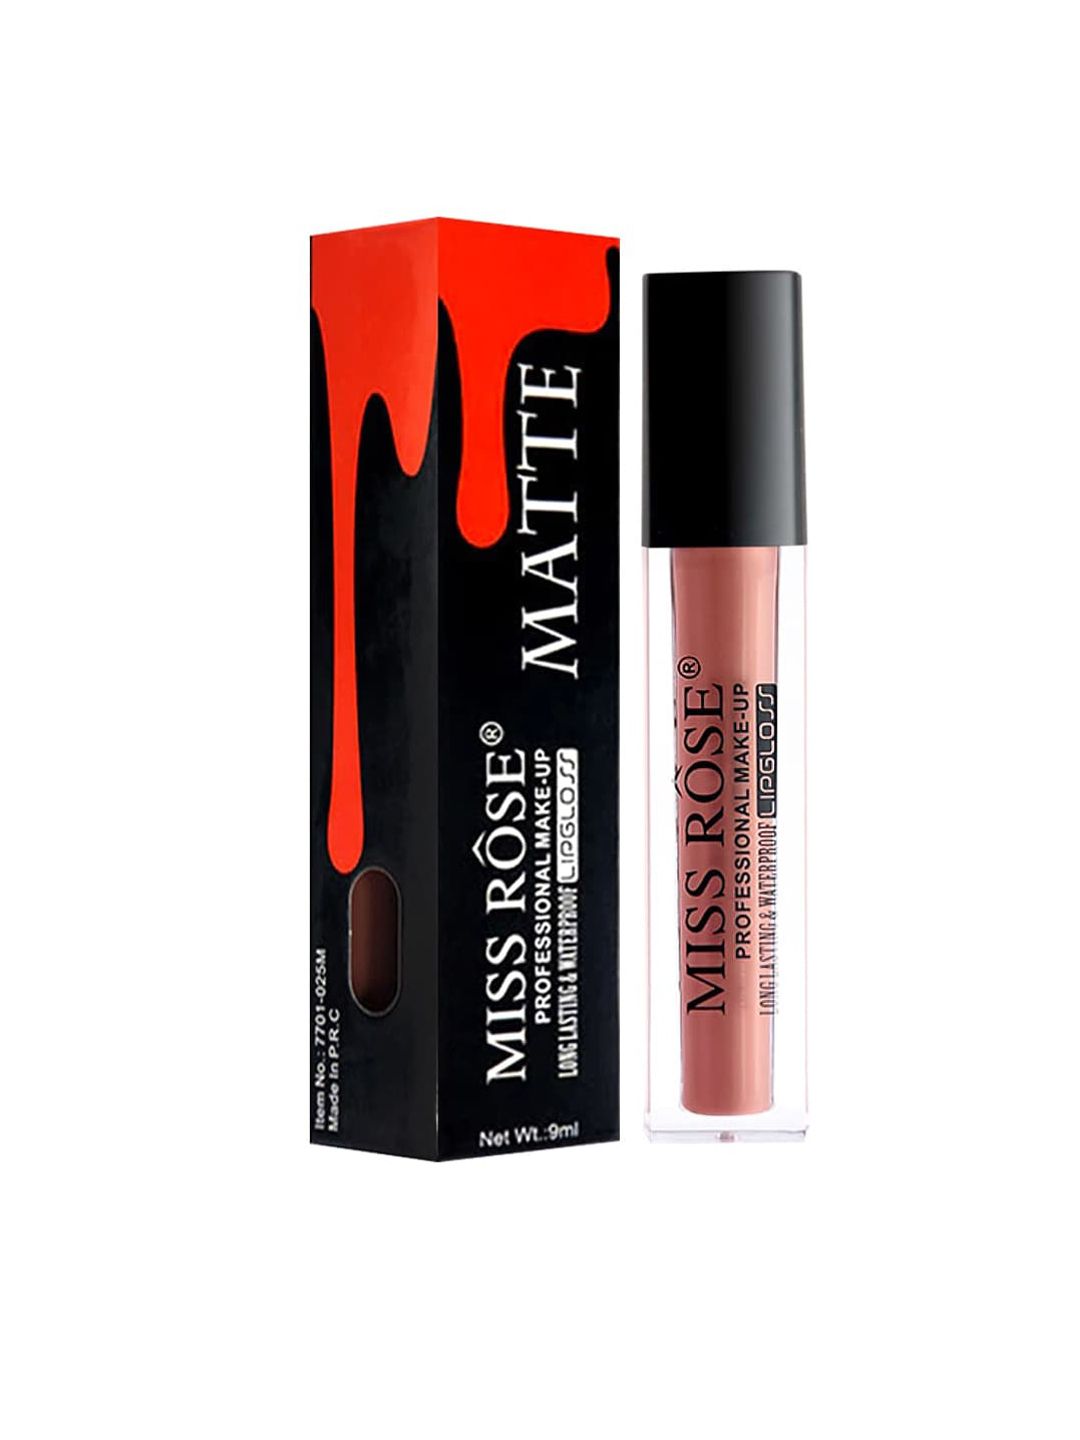 MISS ROSE Shiny Liquid LipGloss 7701-020 01 20 gm Price in India